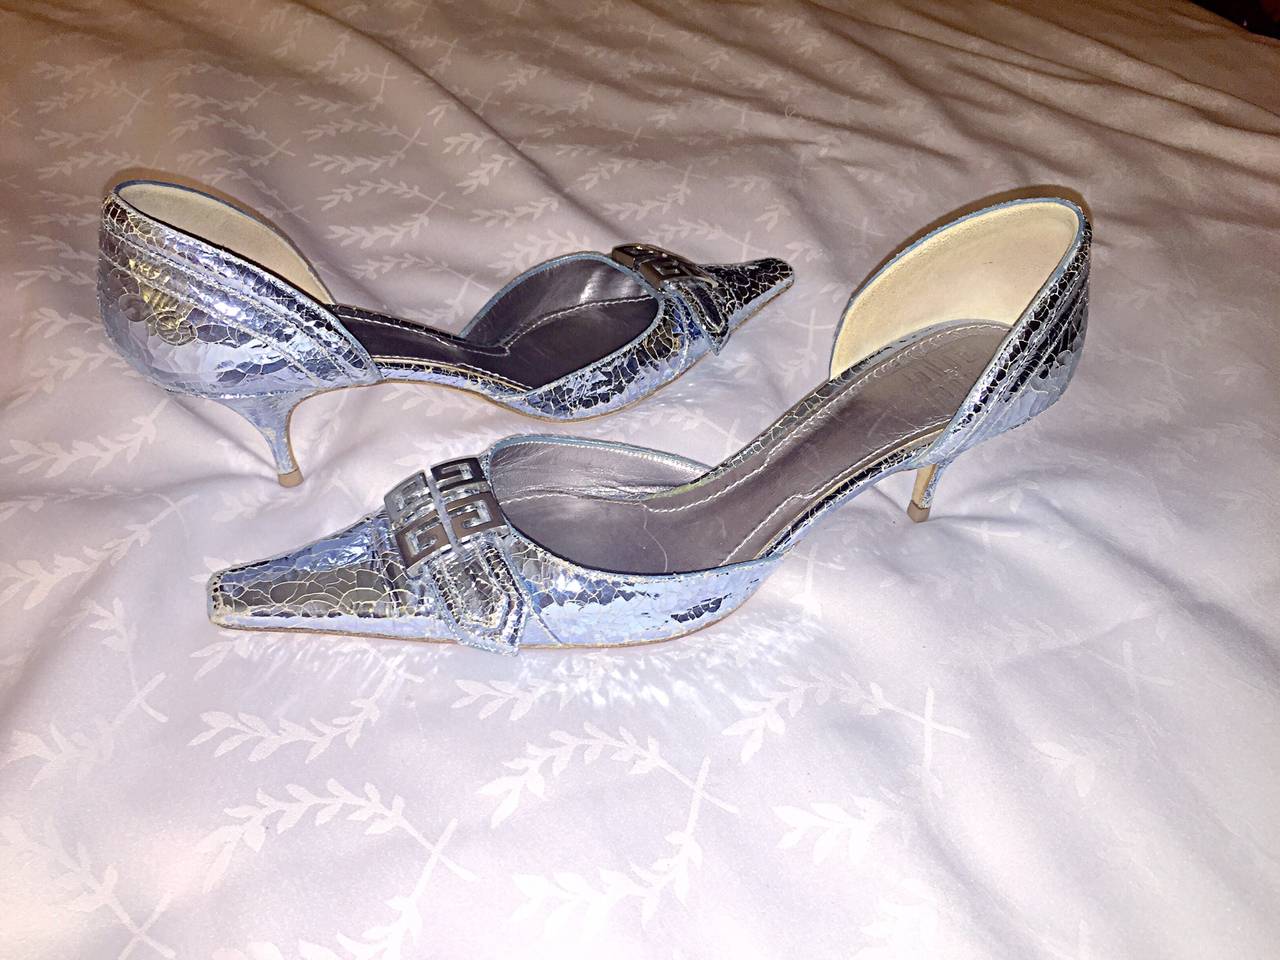 Beautiful brand new pair of early 2000s silver Givenchy heels! Just the right amount of height. Silver Givenchy logo plate on each toe. Unique shaped toe that is very flattering. Leather soles. Never been worn. Made in Italy. Marked Size 40 / US 10